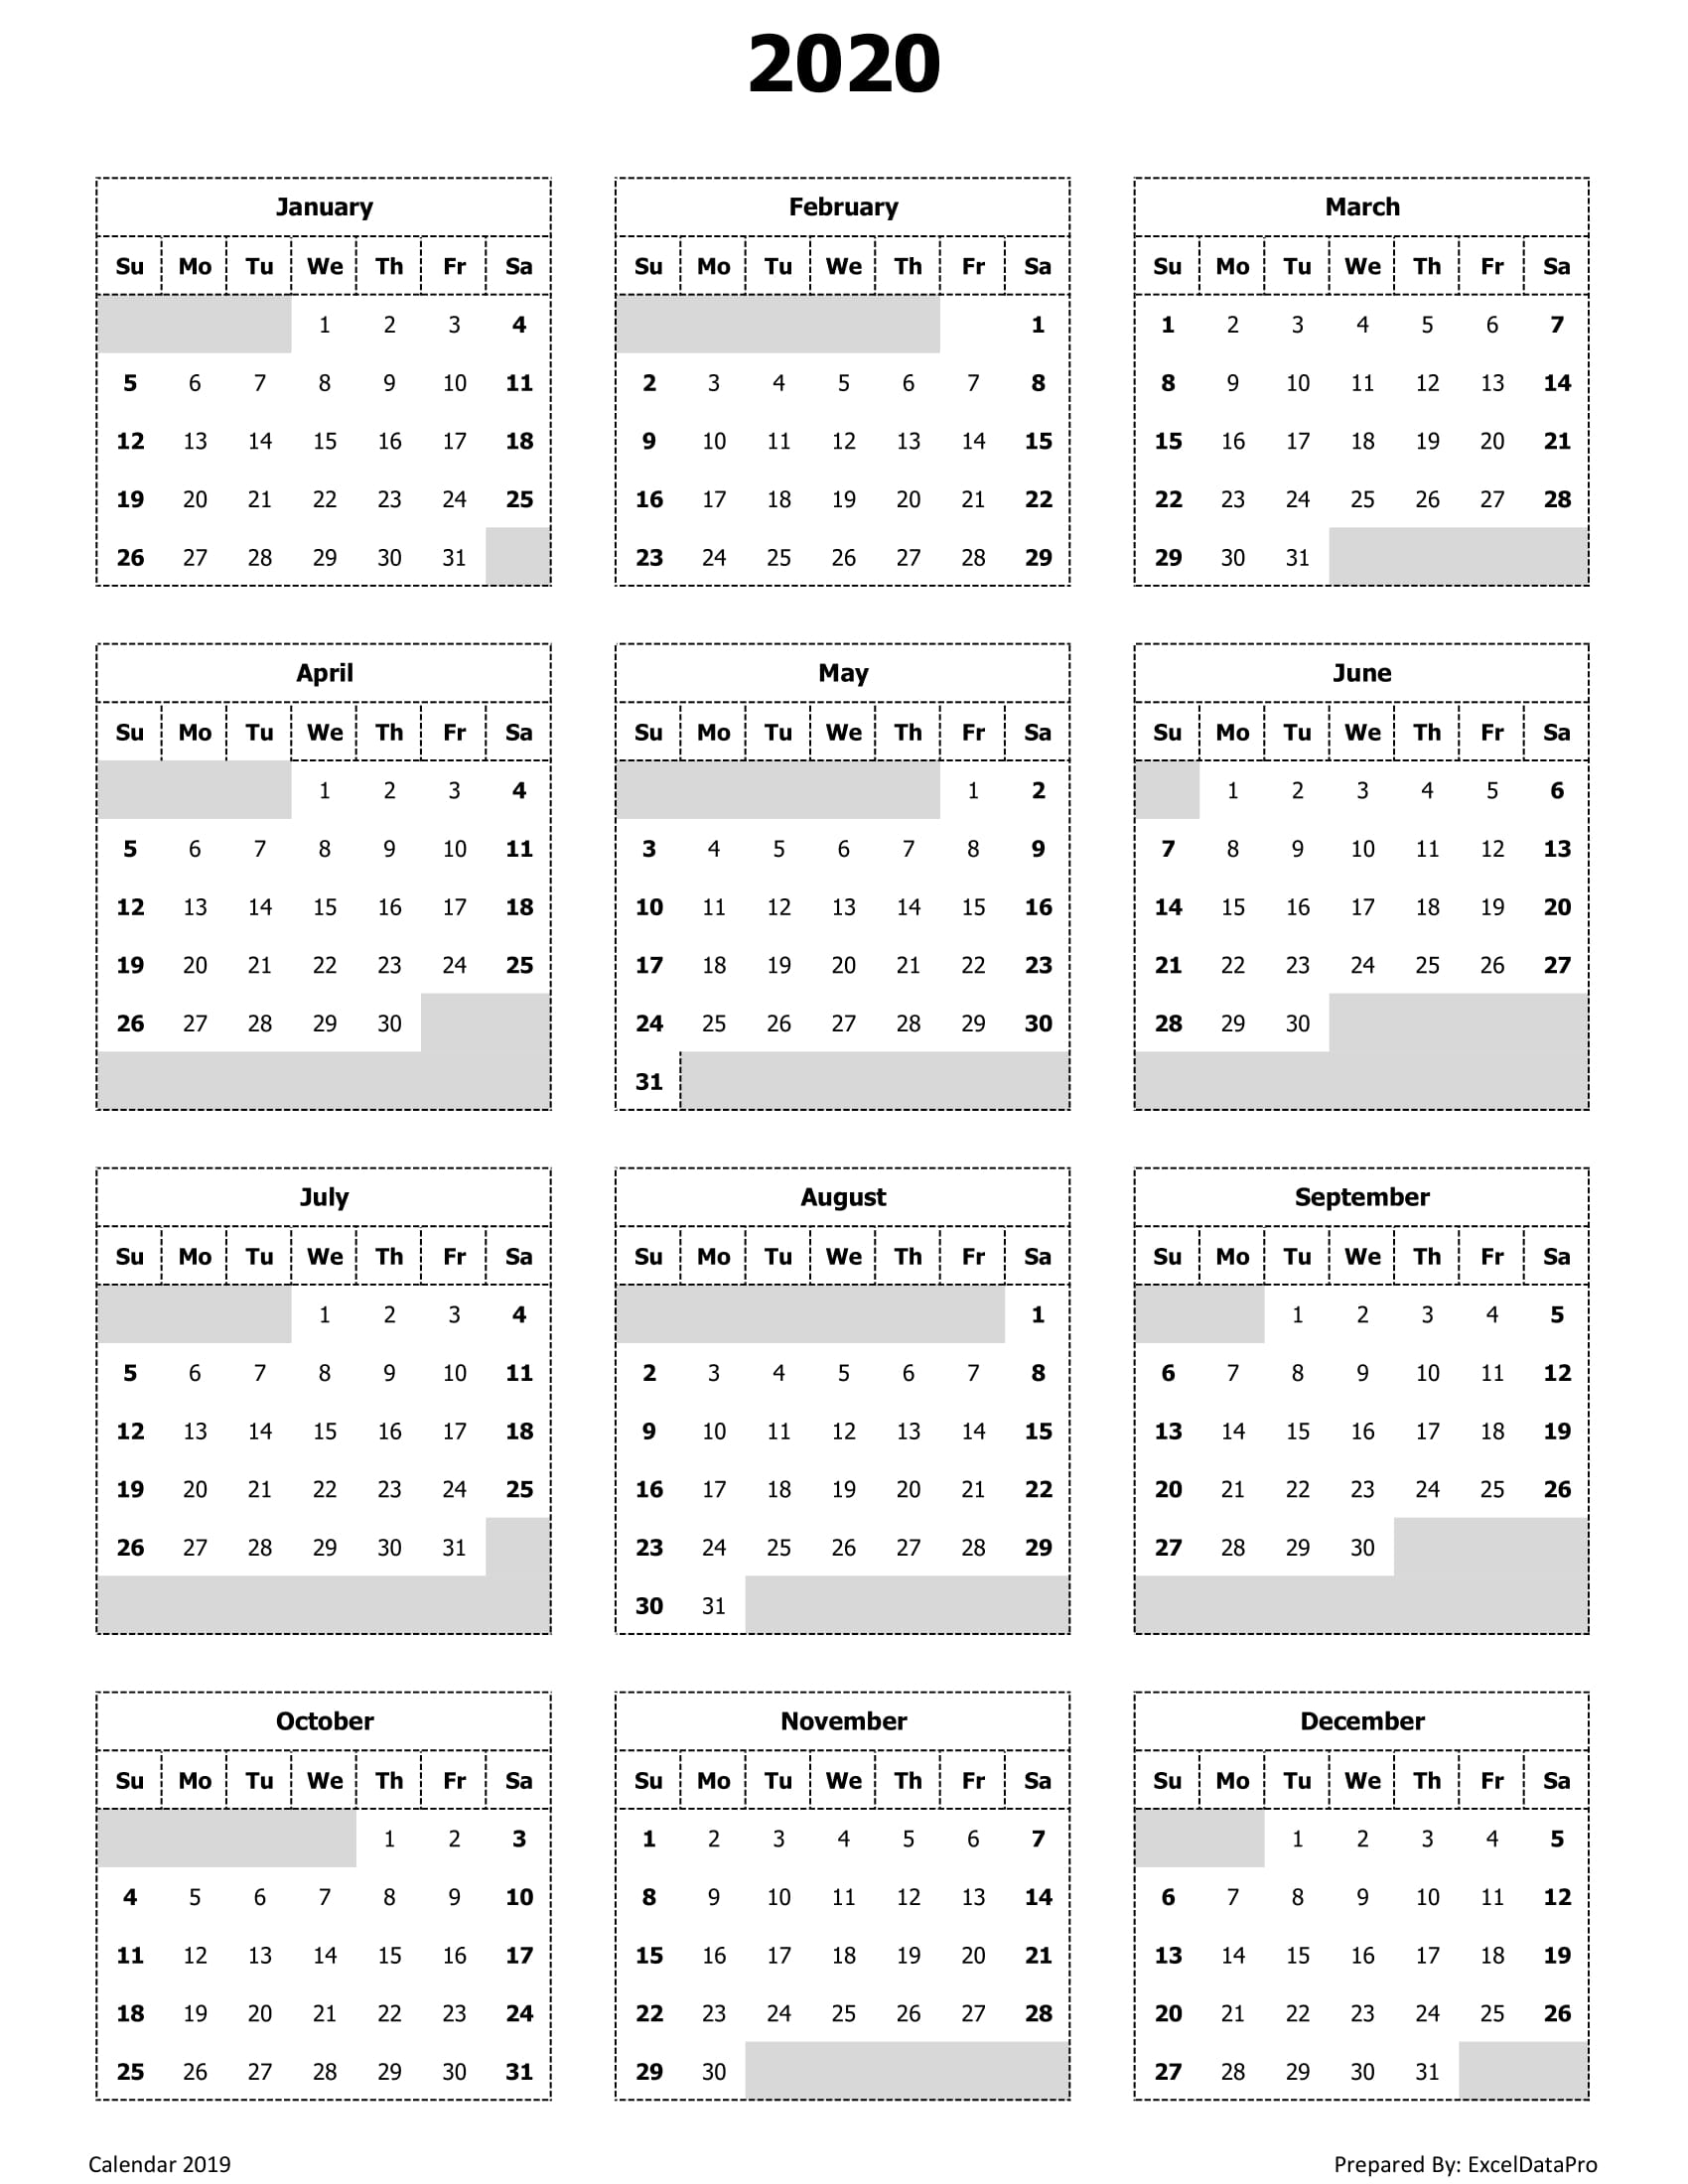 29+ 2020 Yearly Calendar Printable Excel Images